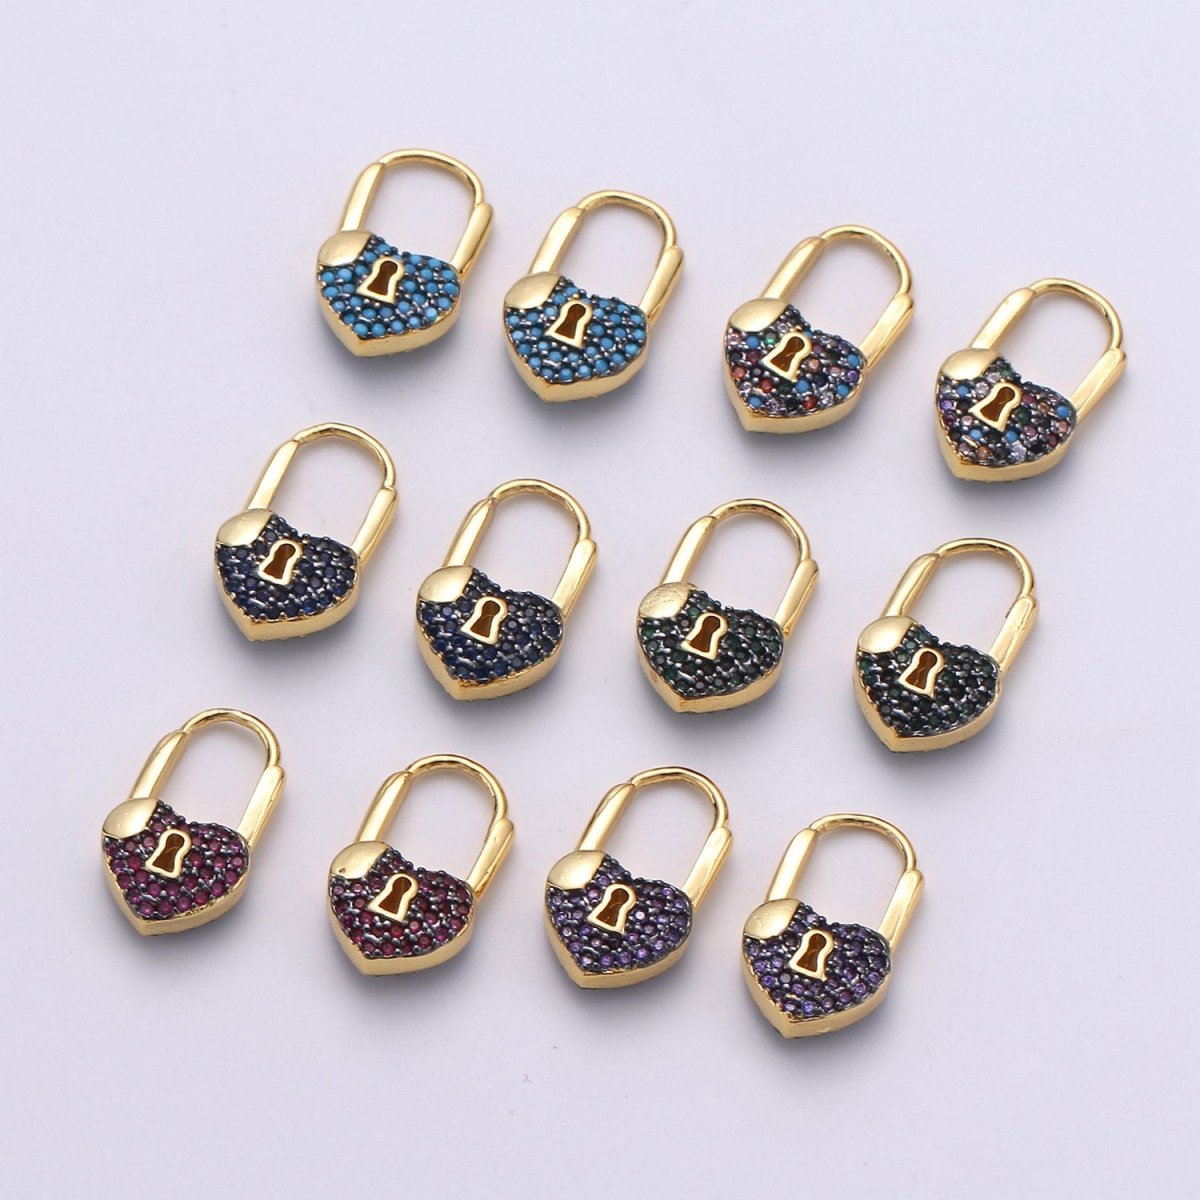 Gold earrings with Cz padlock charm, Heart Lock Charm Gold Mini Hoops Micro Pave Czl Hoops Minimalist and everyday use hoops K-627 - K-632 - DLUXCA